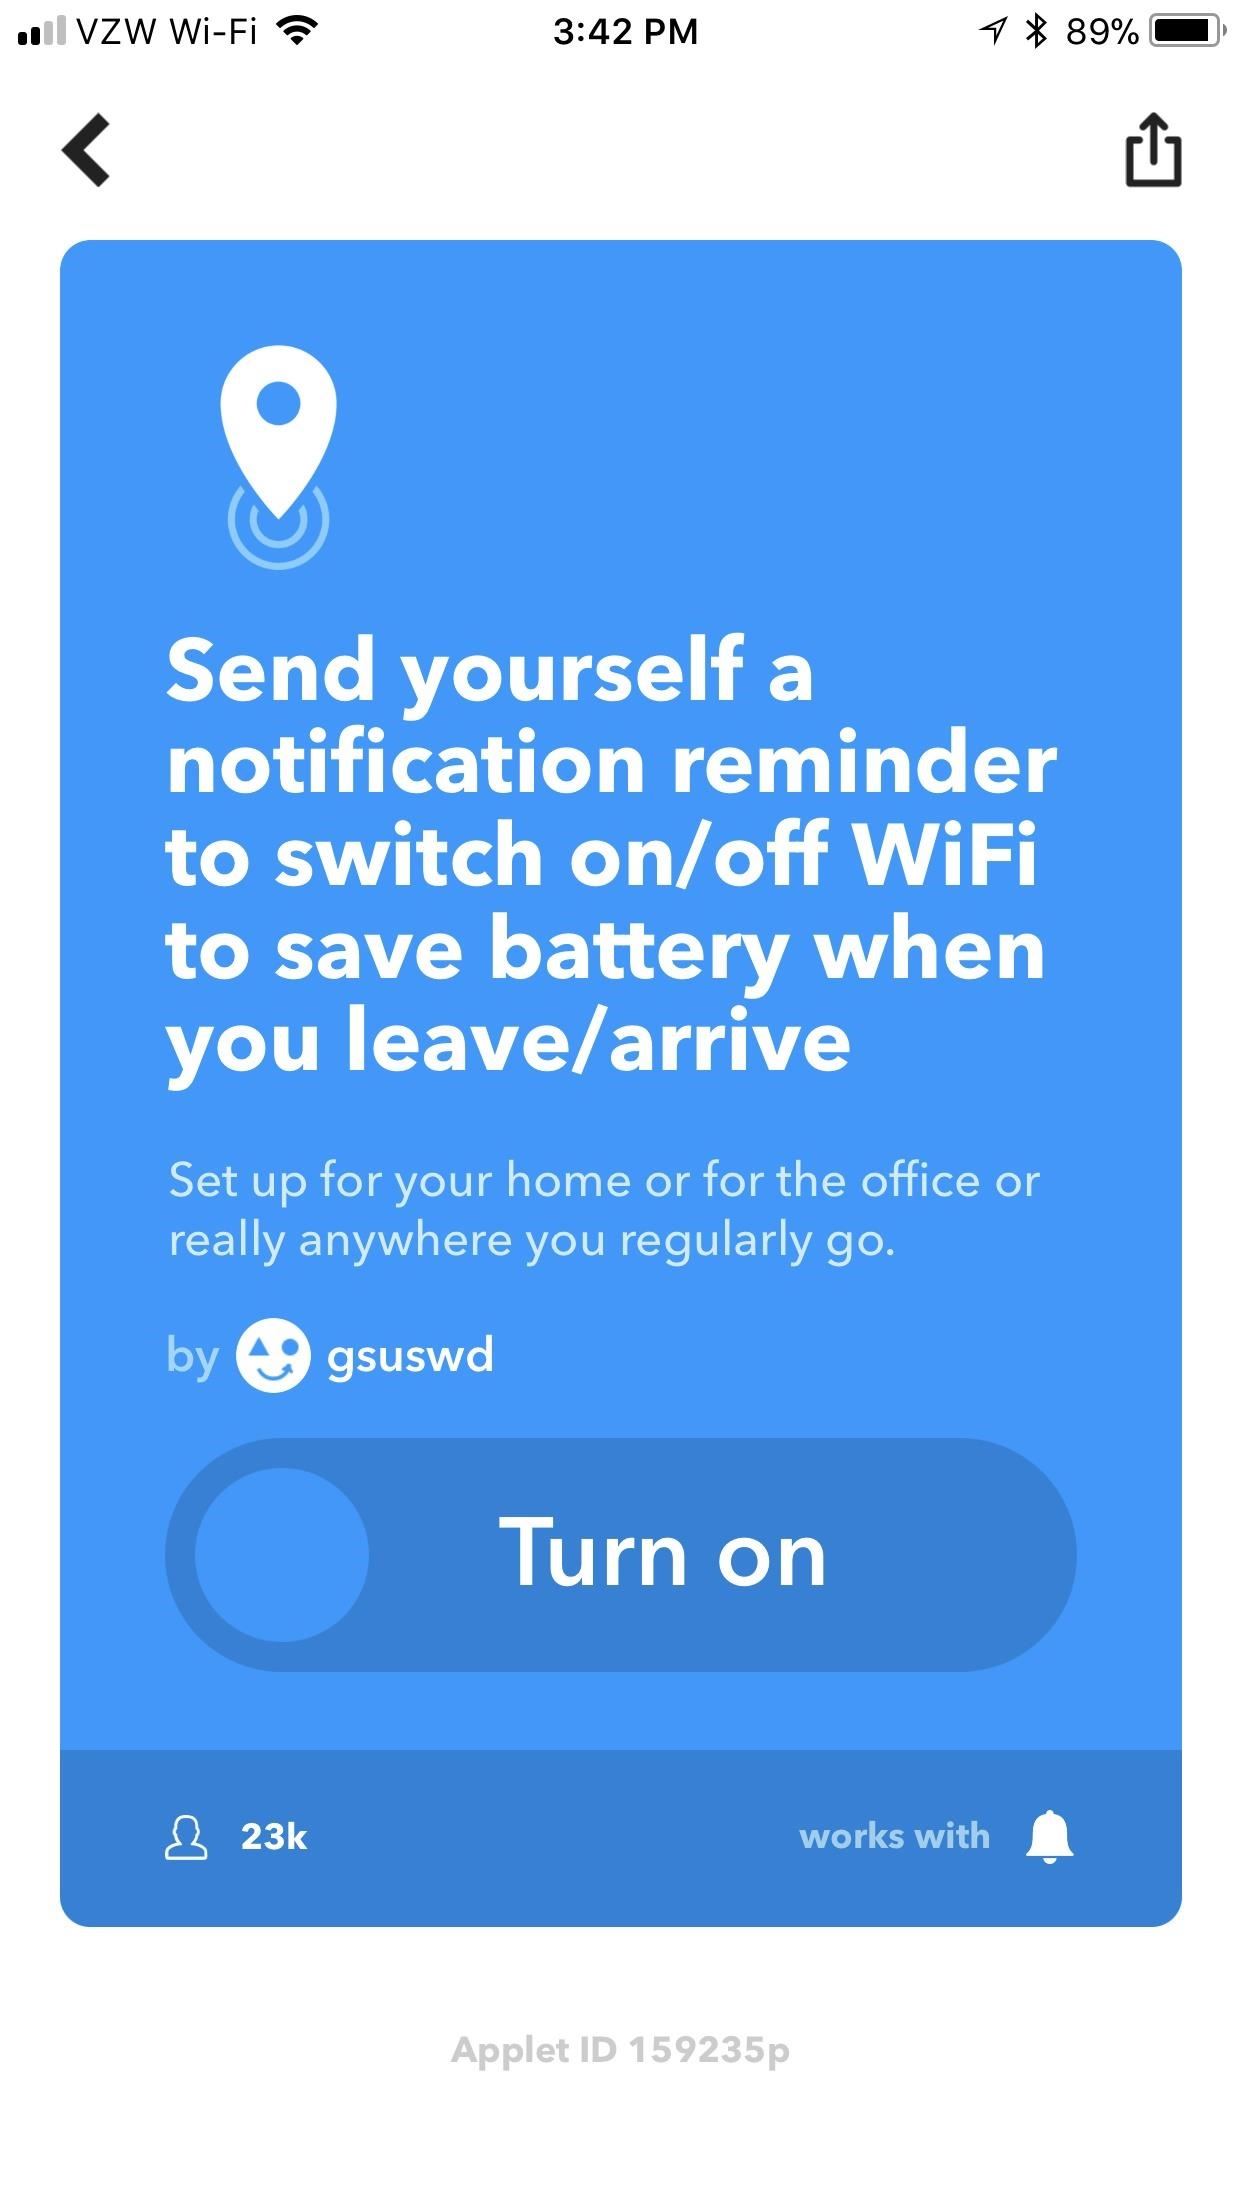 IFTTT 101: 5 Applets That Will Help Save Your Phone's Battery